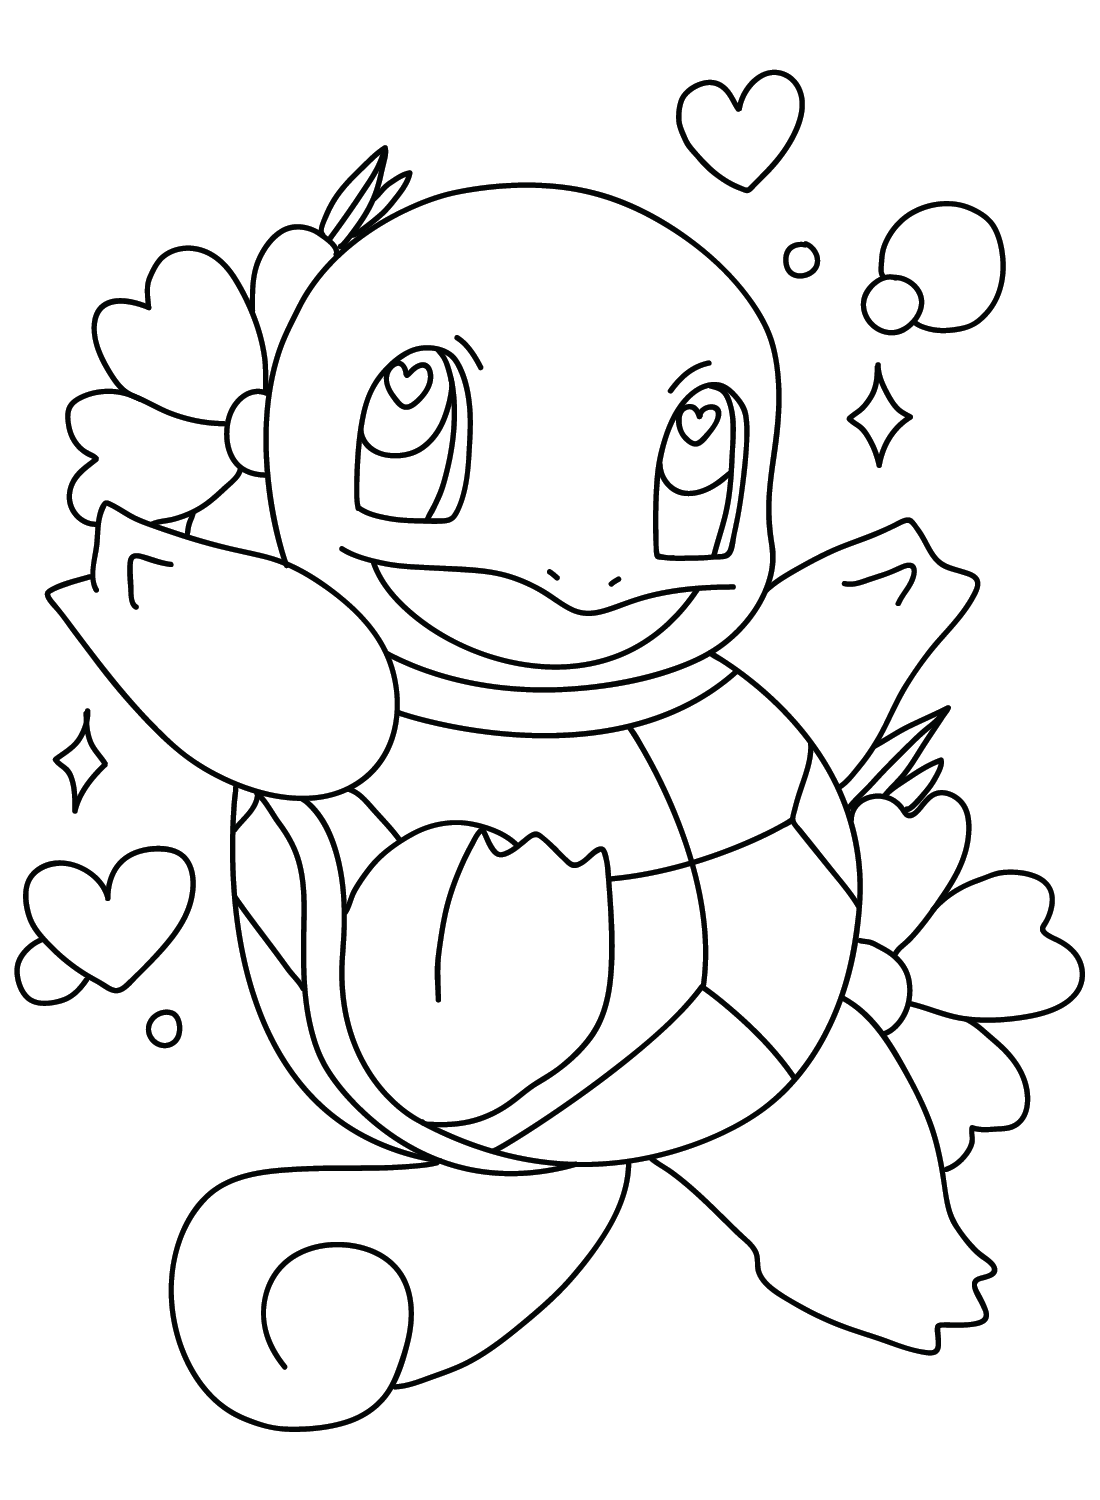 Squirtle Coloring Page from Squirtle